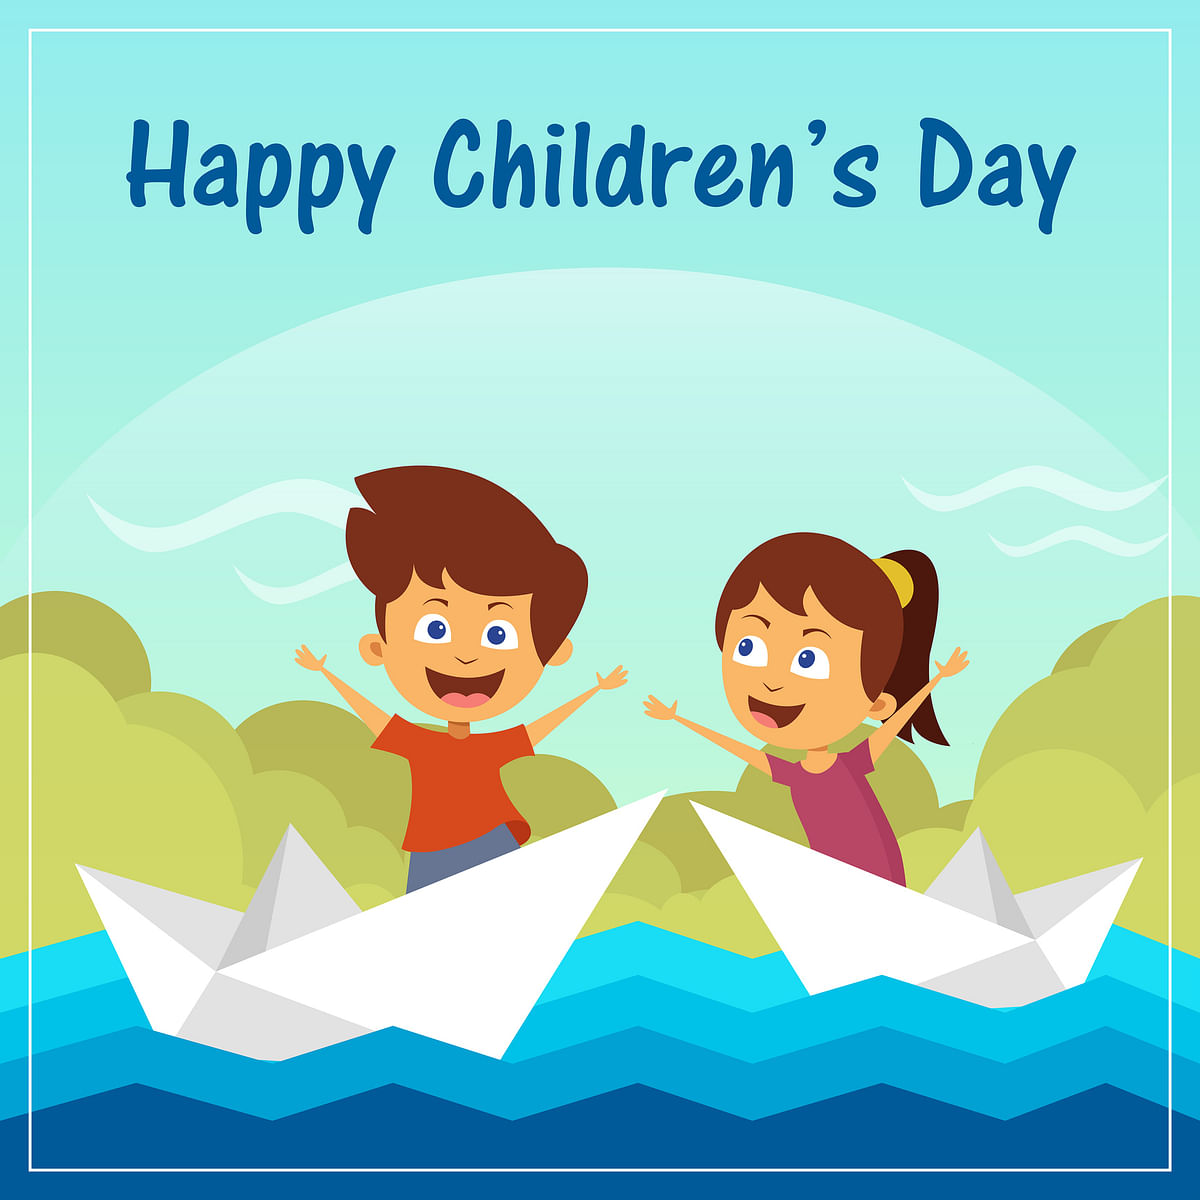 Here are some quotes, statuses, images, greetings, etc you can use to wish kids a happy Children’s Day.